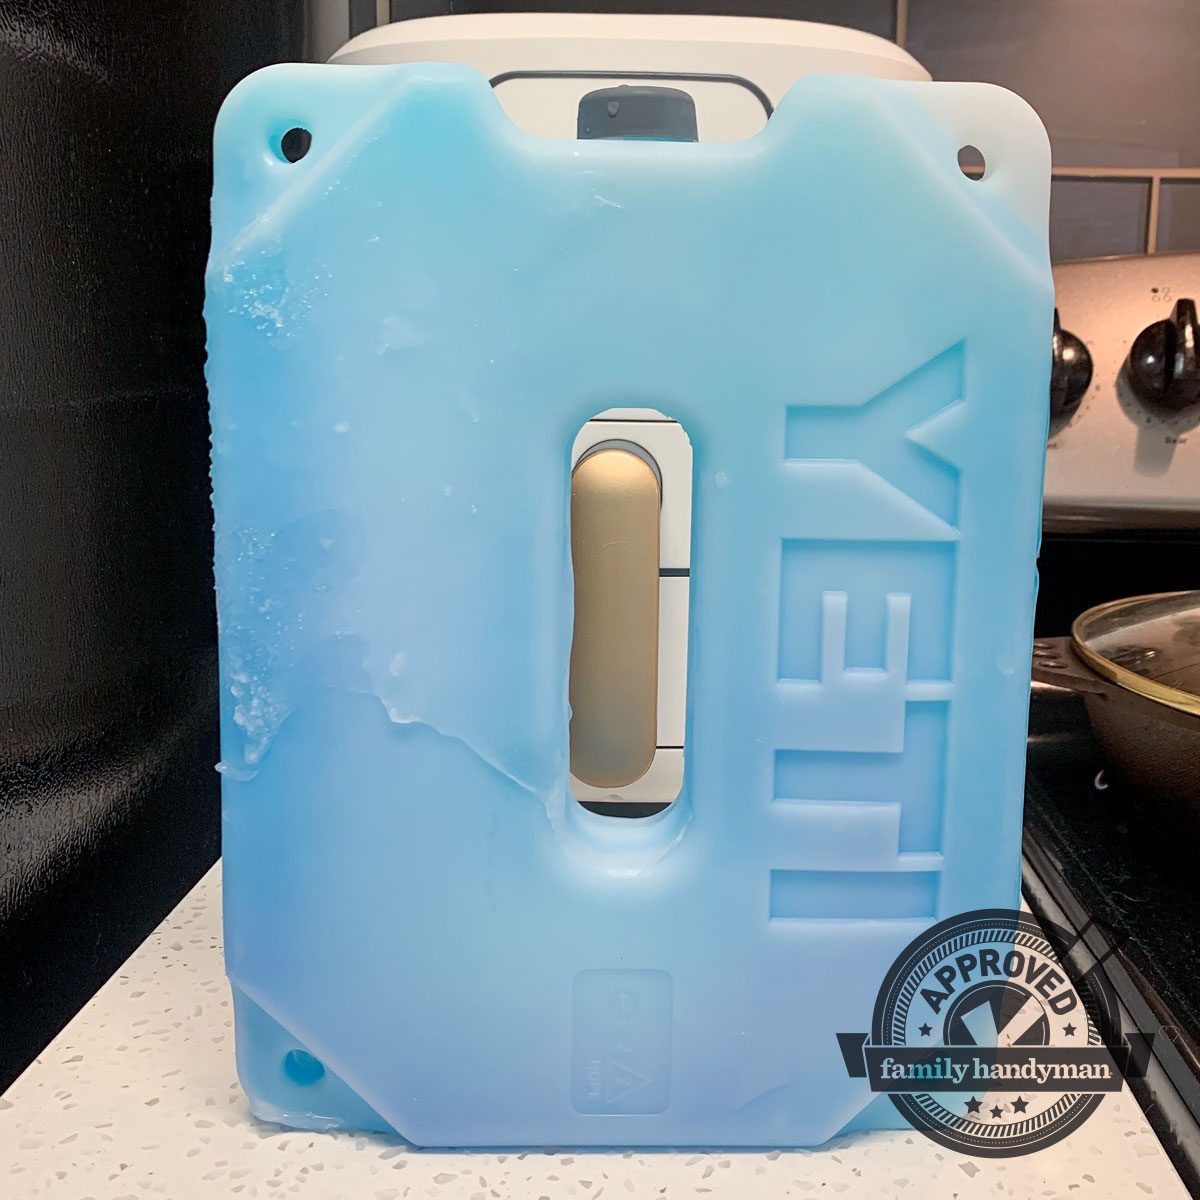 Yeti Coolers and Accessories - The blog of the gritroutdoors.com